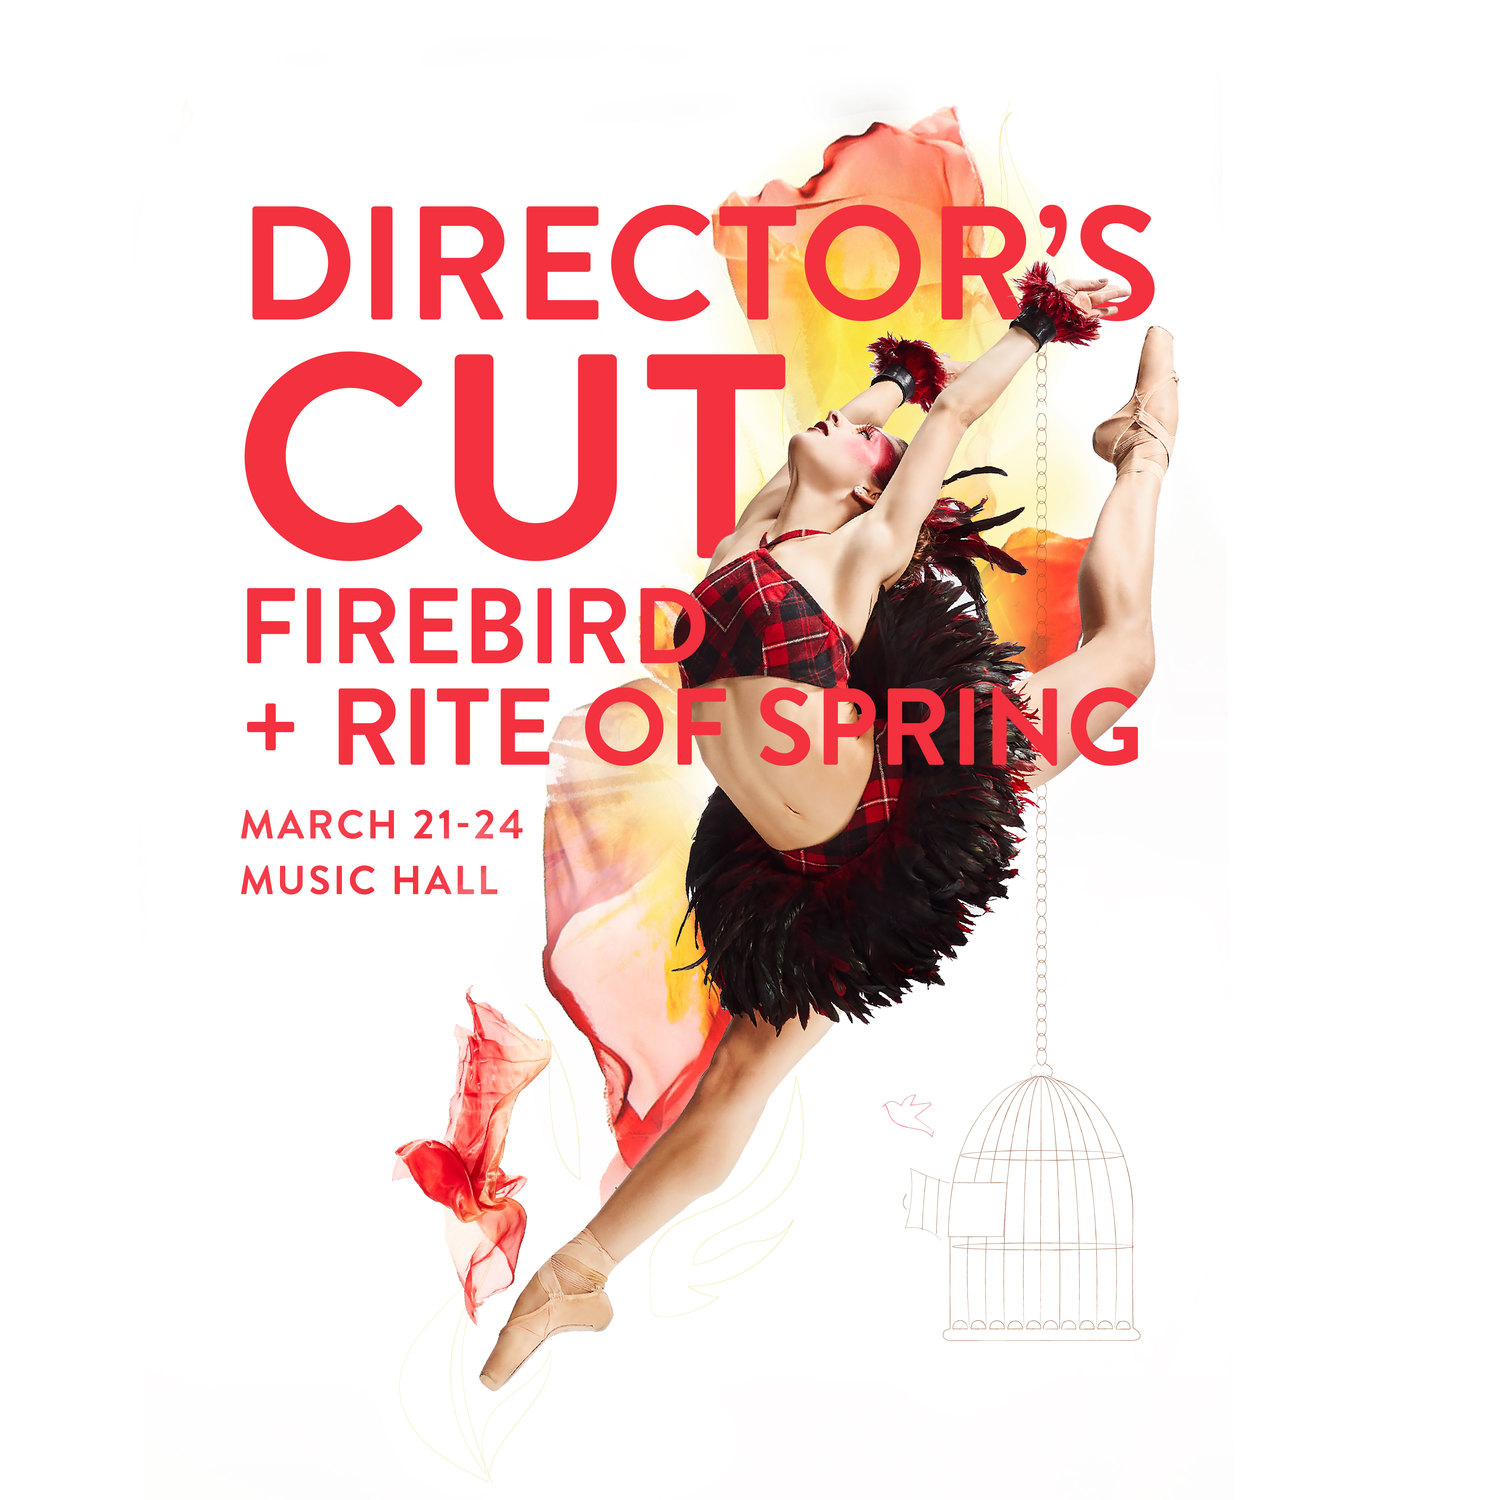 Where classic meets contemporary.
Experience the colossal blend of music and dance in this dazzling pair of works by Cincinnati favorite, Adam Hougland, both set to the music of the iconic Igor Stravinsky. The first is Rite of Spring, a ritualistically visceral tale that is breathtaking and tribal at the same time. The second is the intoxicating Firebird, Hougland’s unique take on the classic ballet about the intertwined lives of a hunter and a magical bird. 1